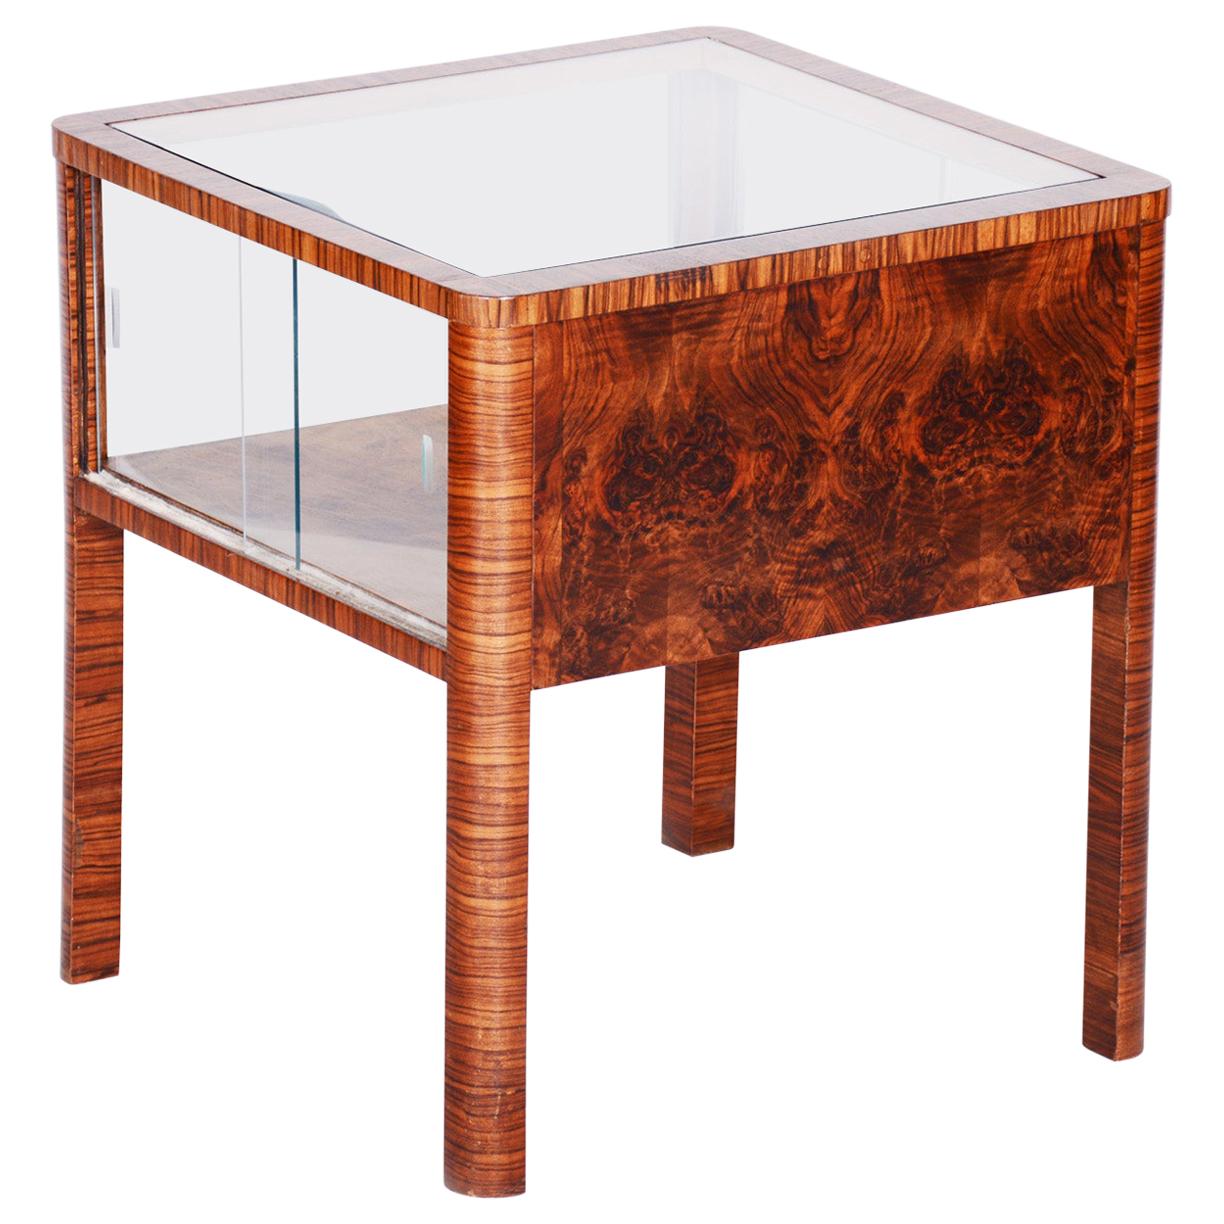 Small Czech Art Deco Walnut Table, Glass Showcase in the Table, 1930s